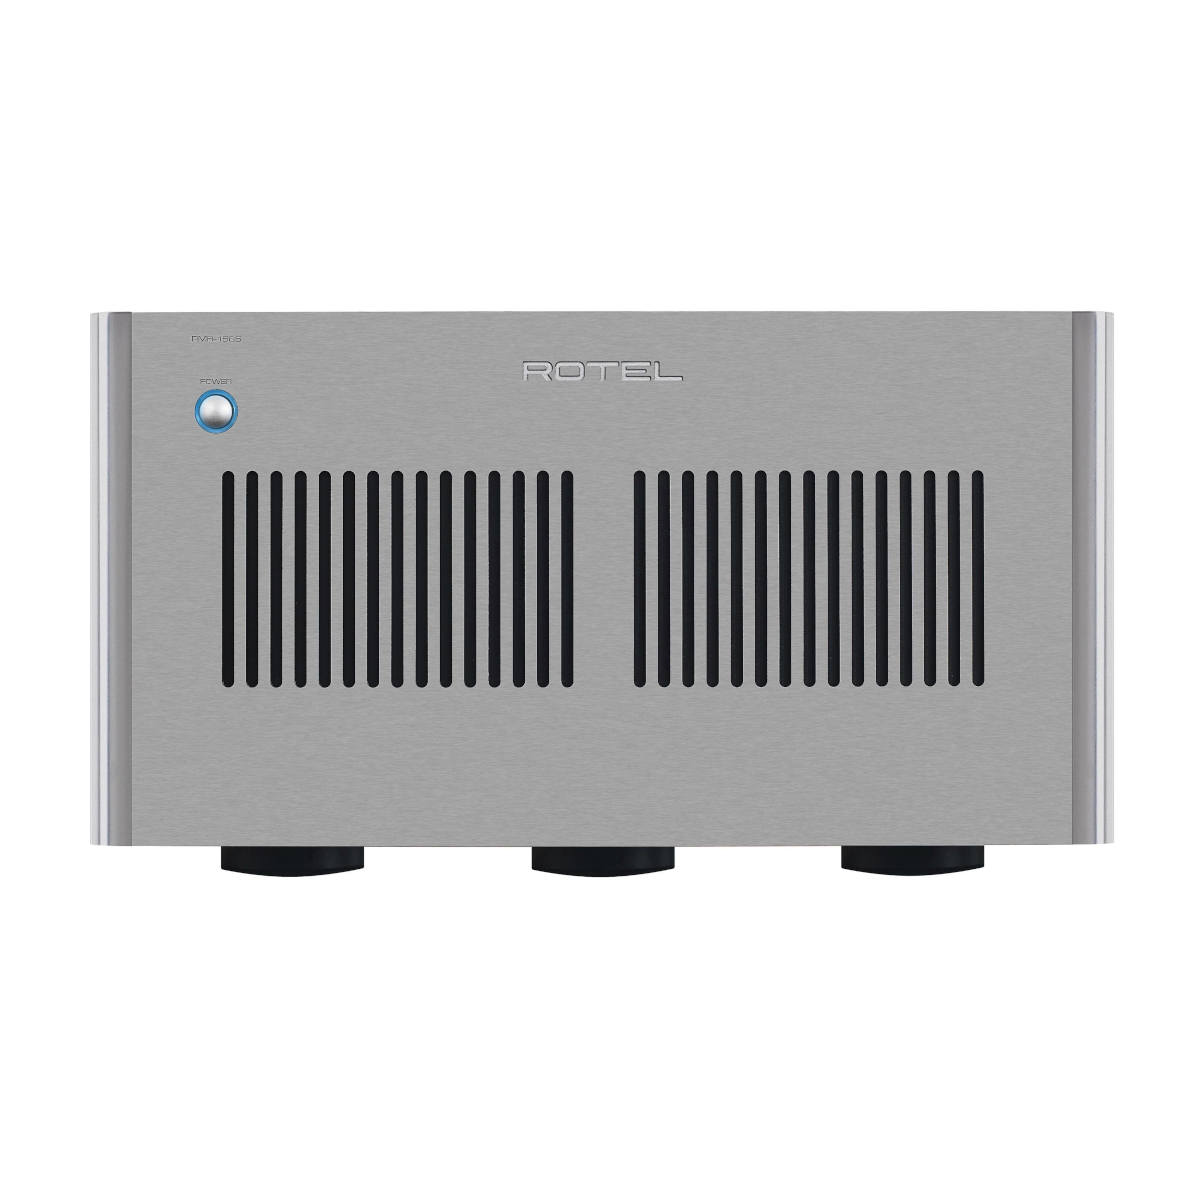 Rotel RMB-1585 200W x 5 channel Power Amplifier (Silver) - Ooberpad India